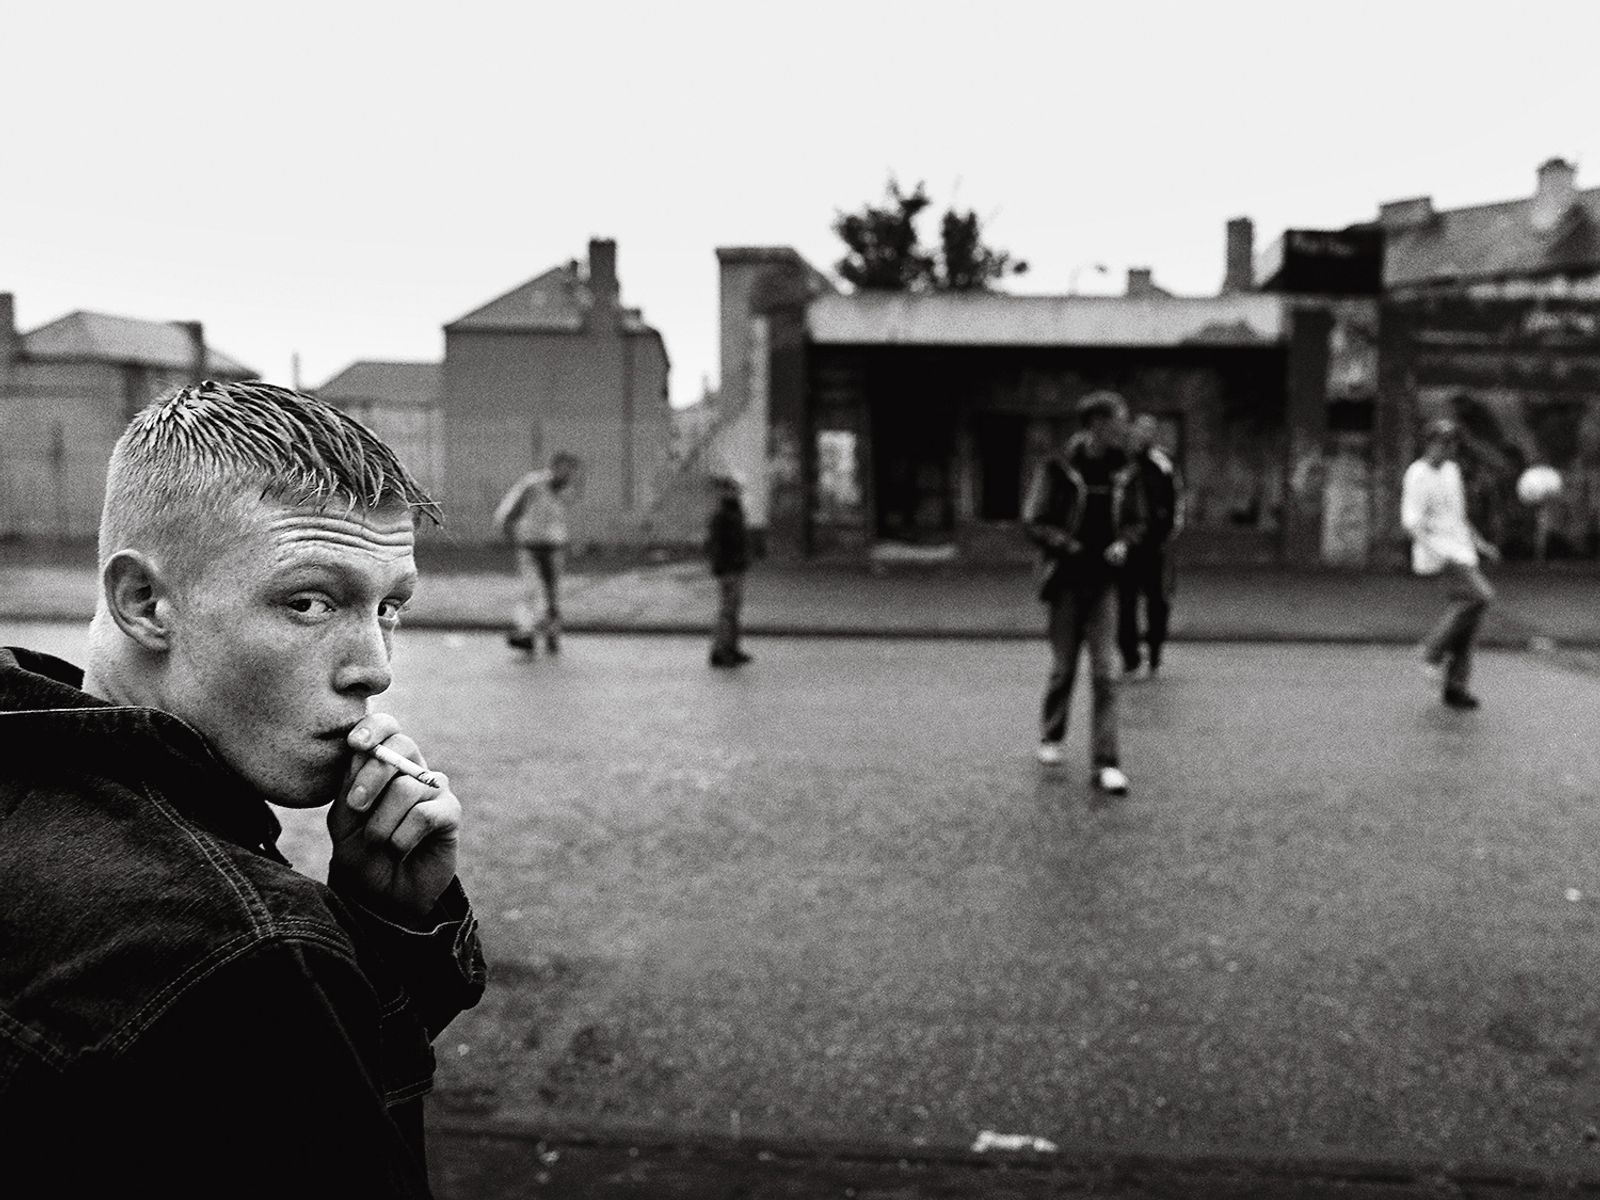 © Toby Binder - Edinburgh, Niddrie. Teenagers meeting on the streets for football, cigarettes and alcohol.